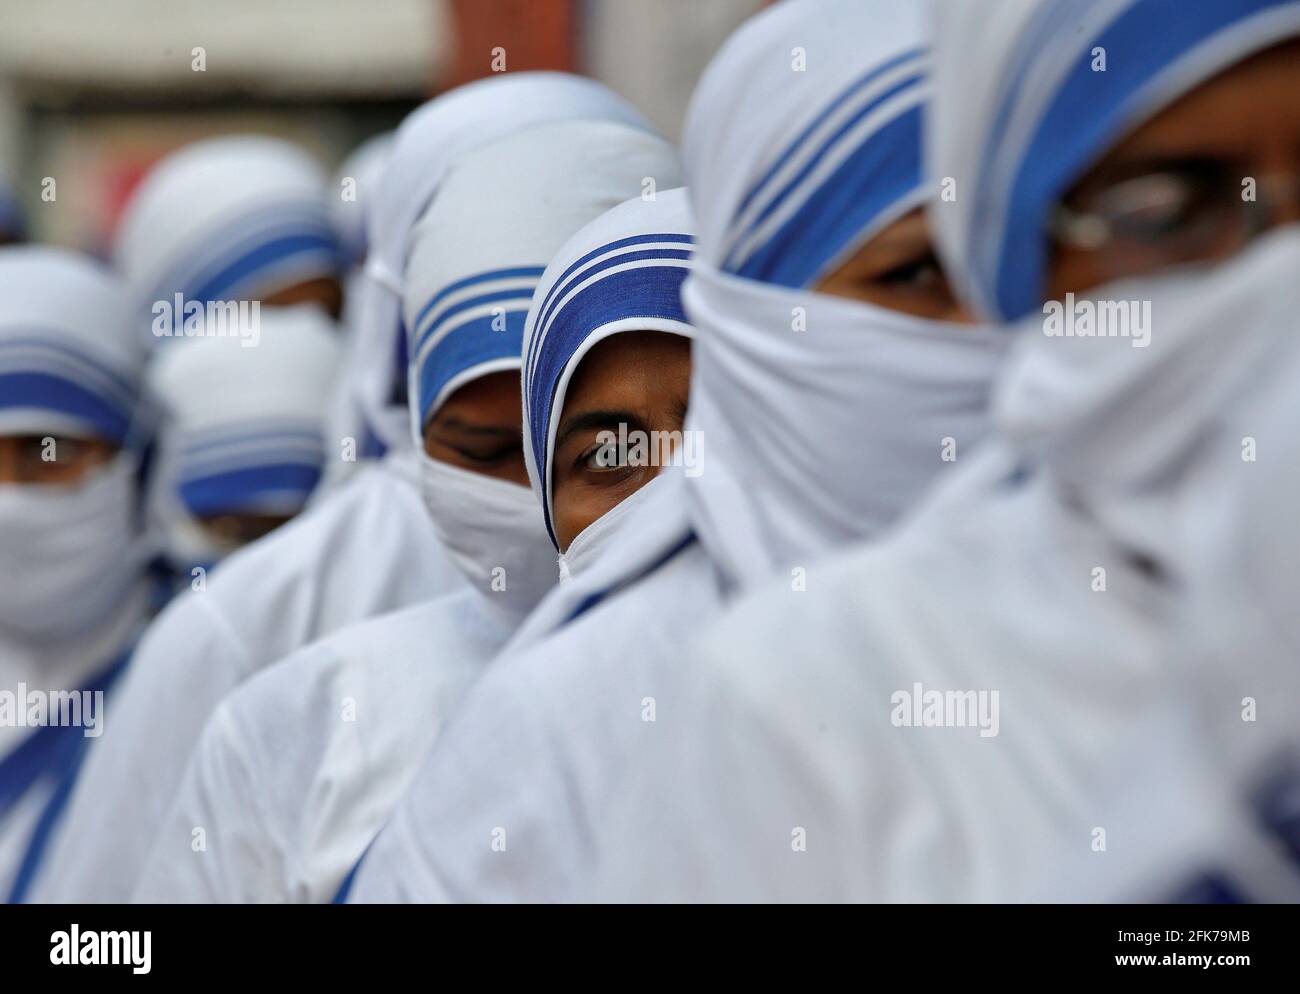 Catholic nuns from the Missionaries of Charity, the global order of nuns founded by Saint Mother Teresa, wait in a line to cast their vote outside a polling station during the eight and final phase of West Bengal state election, amid the spread of the coronavirus disease (COVID-19) in Kolkata, India, April 29, 2021. REUTERS/Rupak De Chowdhuri Stock Photo